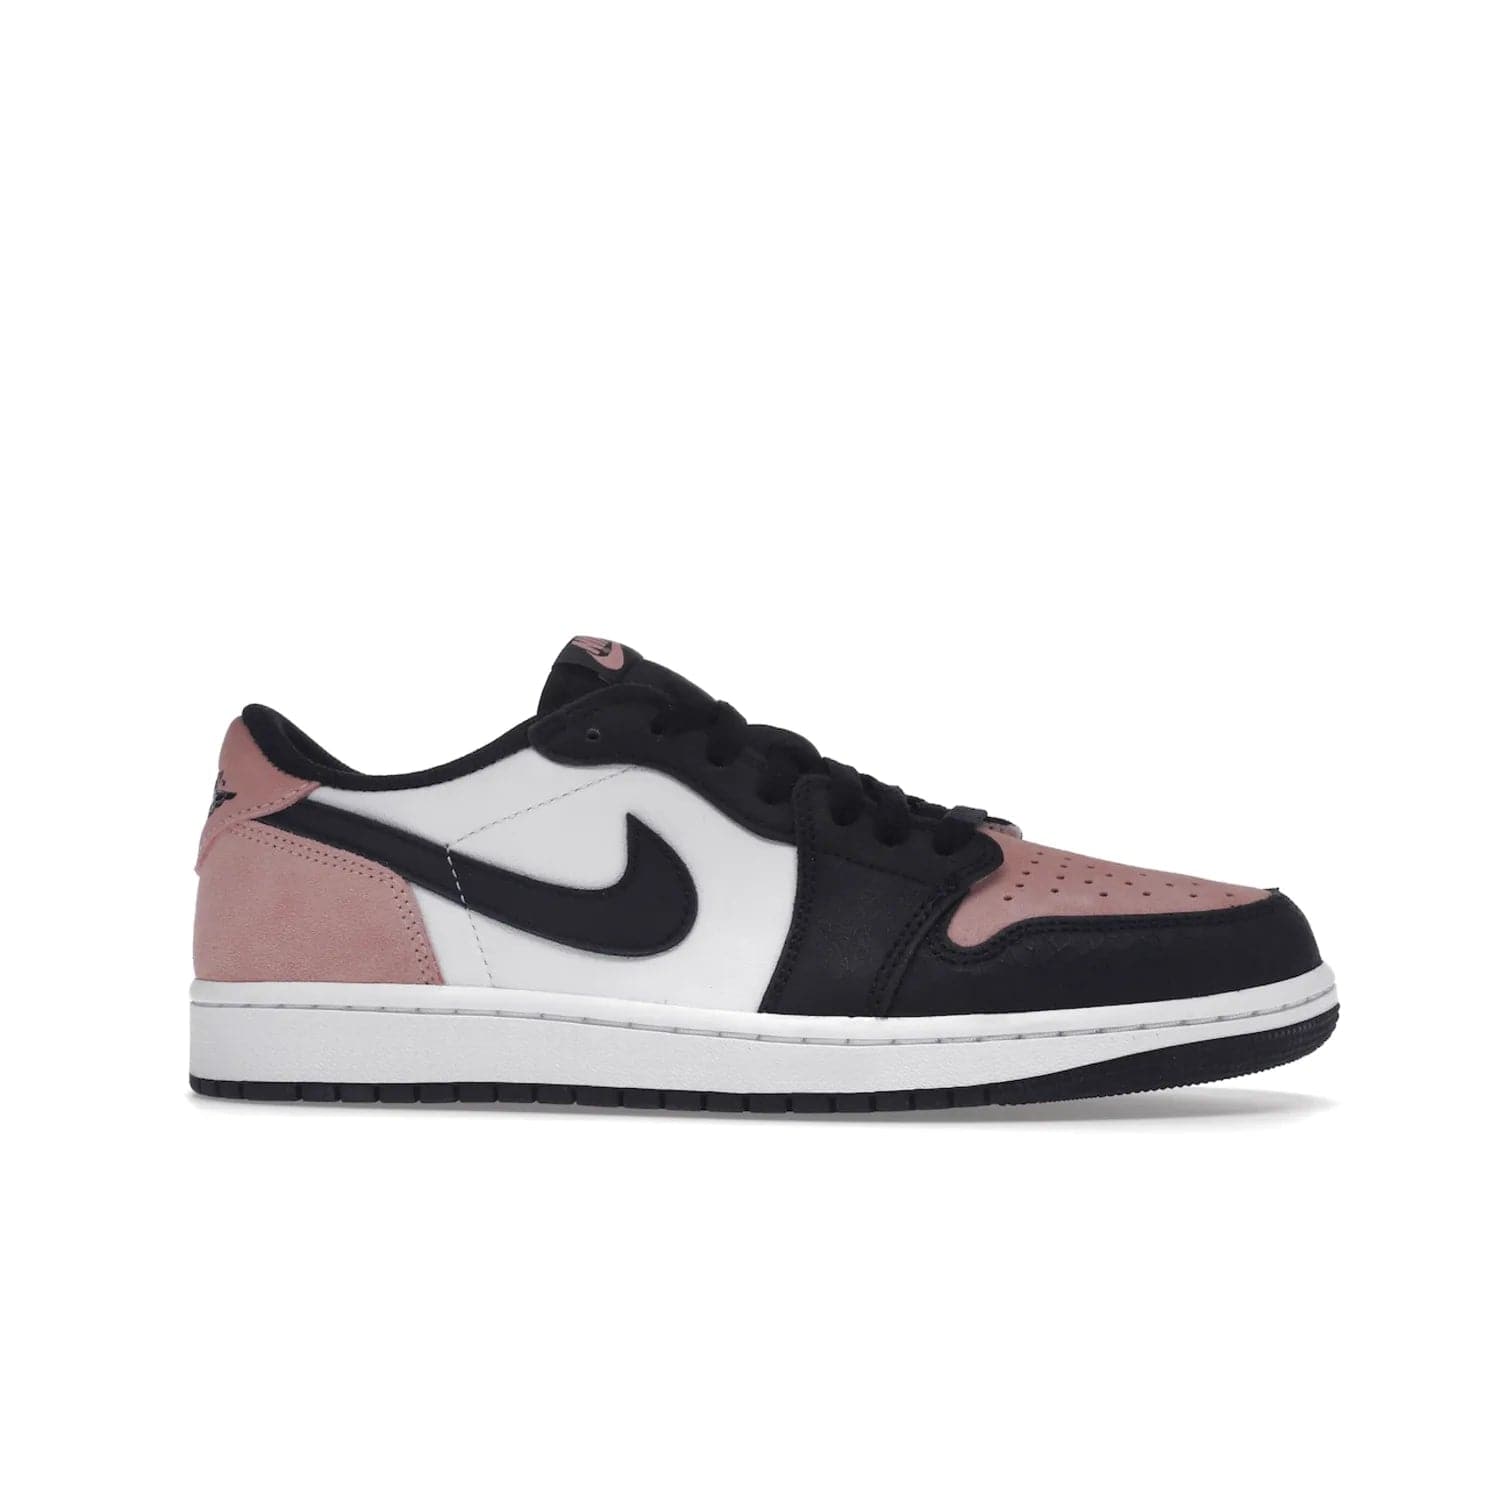 Jordan 1 Low OG Bleached Coral - Image 2 - Only at www.BallersClubKickz.com - Introducing the Air Jordan 1 Low OG Bleached Coral. Constructed with white leather, black cracked leather & Bleached Coral suede. Signature Jordan Wings logo, white Air sole. Get the pack in July 2022 and stand out.